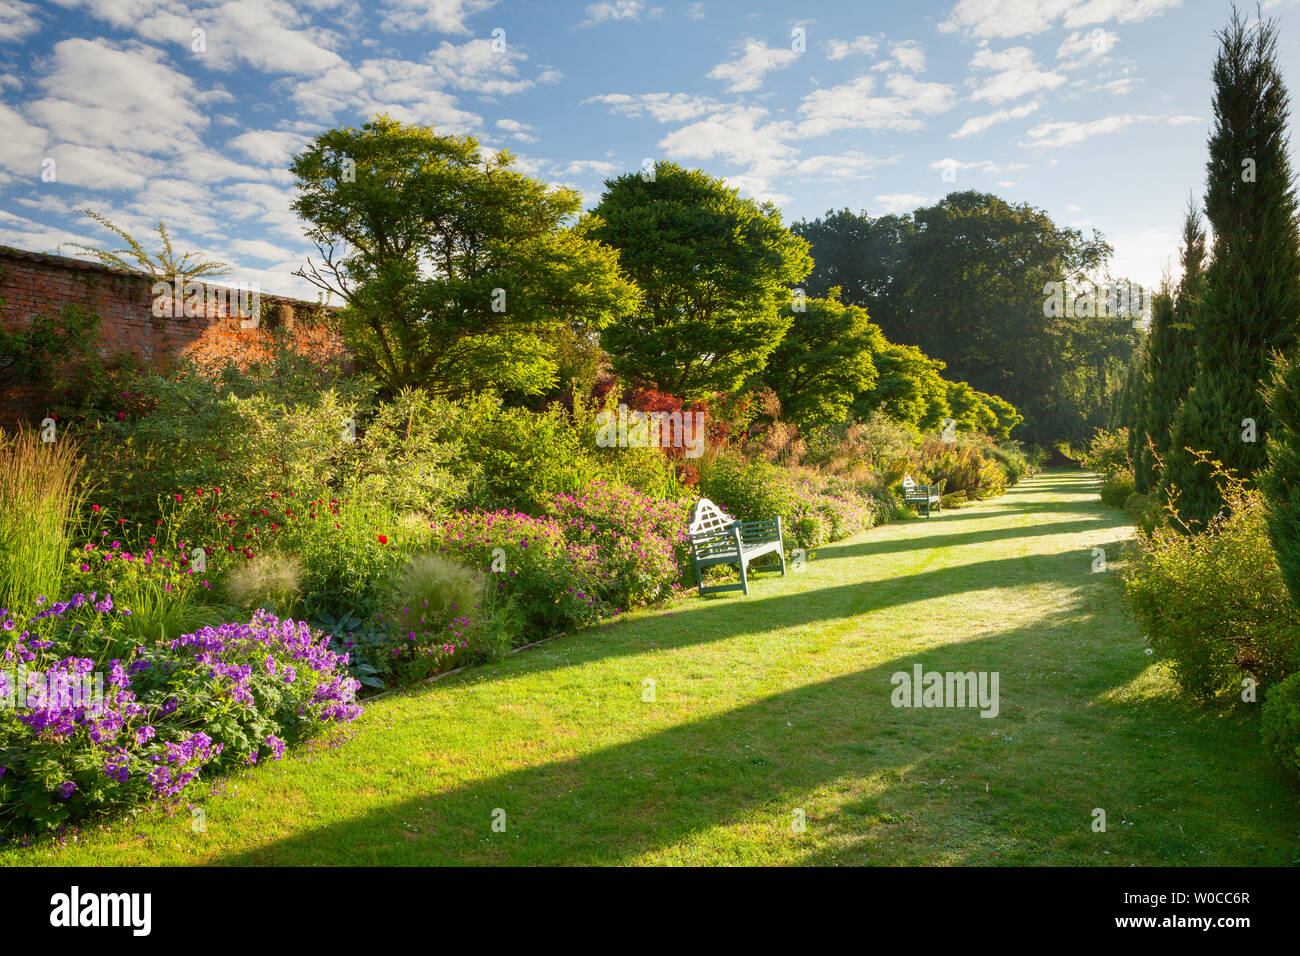 UK Weather: A bright morning at Elsham Gardens and Country Park. Elsham, North Lincolnshire, UK. 21st June 2019. Stock Photo